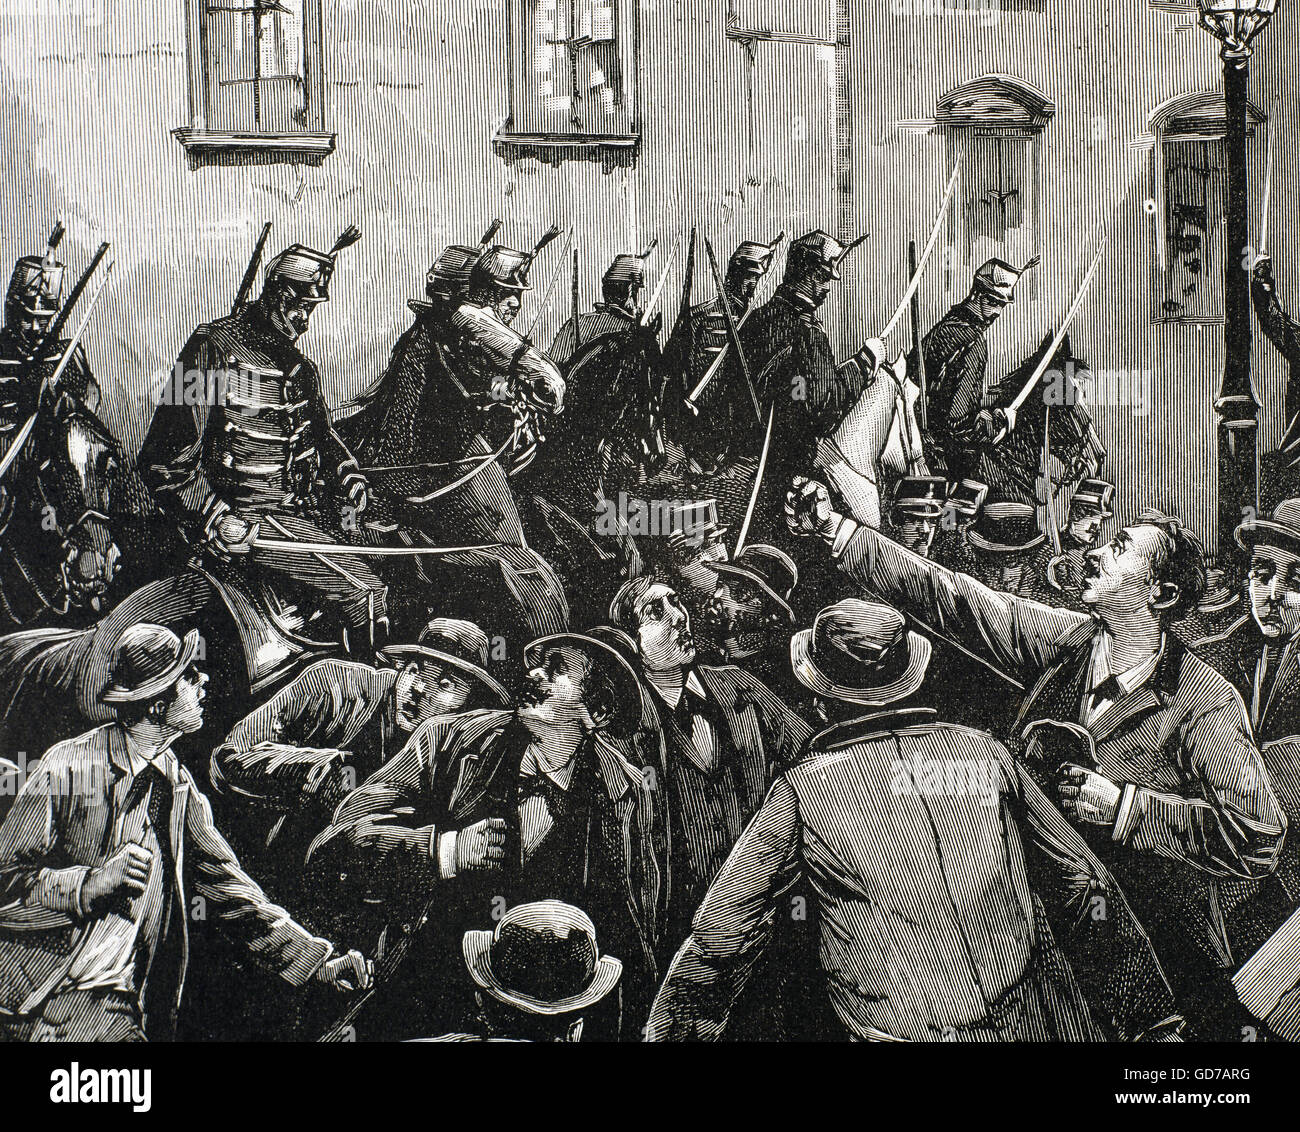 Austria. Vienna. Labour movement. Charge of Austrian hussars against the strikers mutineers in the neighborhood of New-Lerchenfeld, April 8, 1890. Engraving. Stock Photo